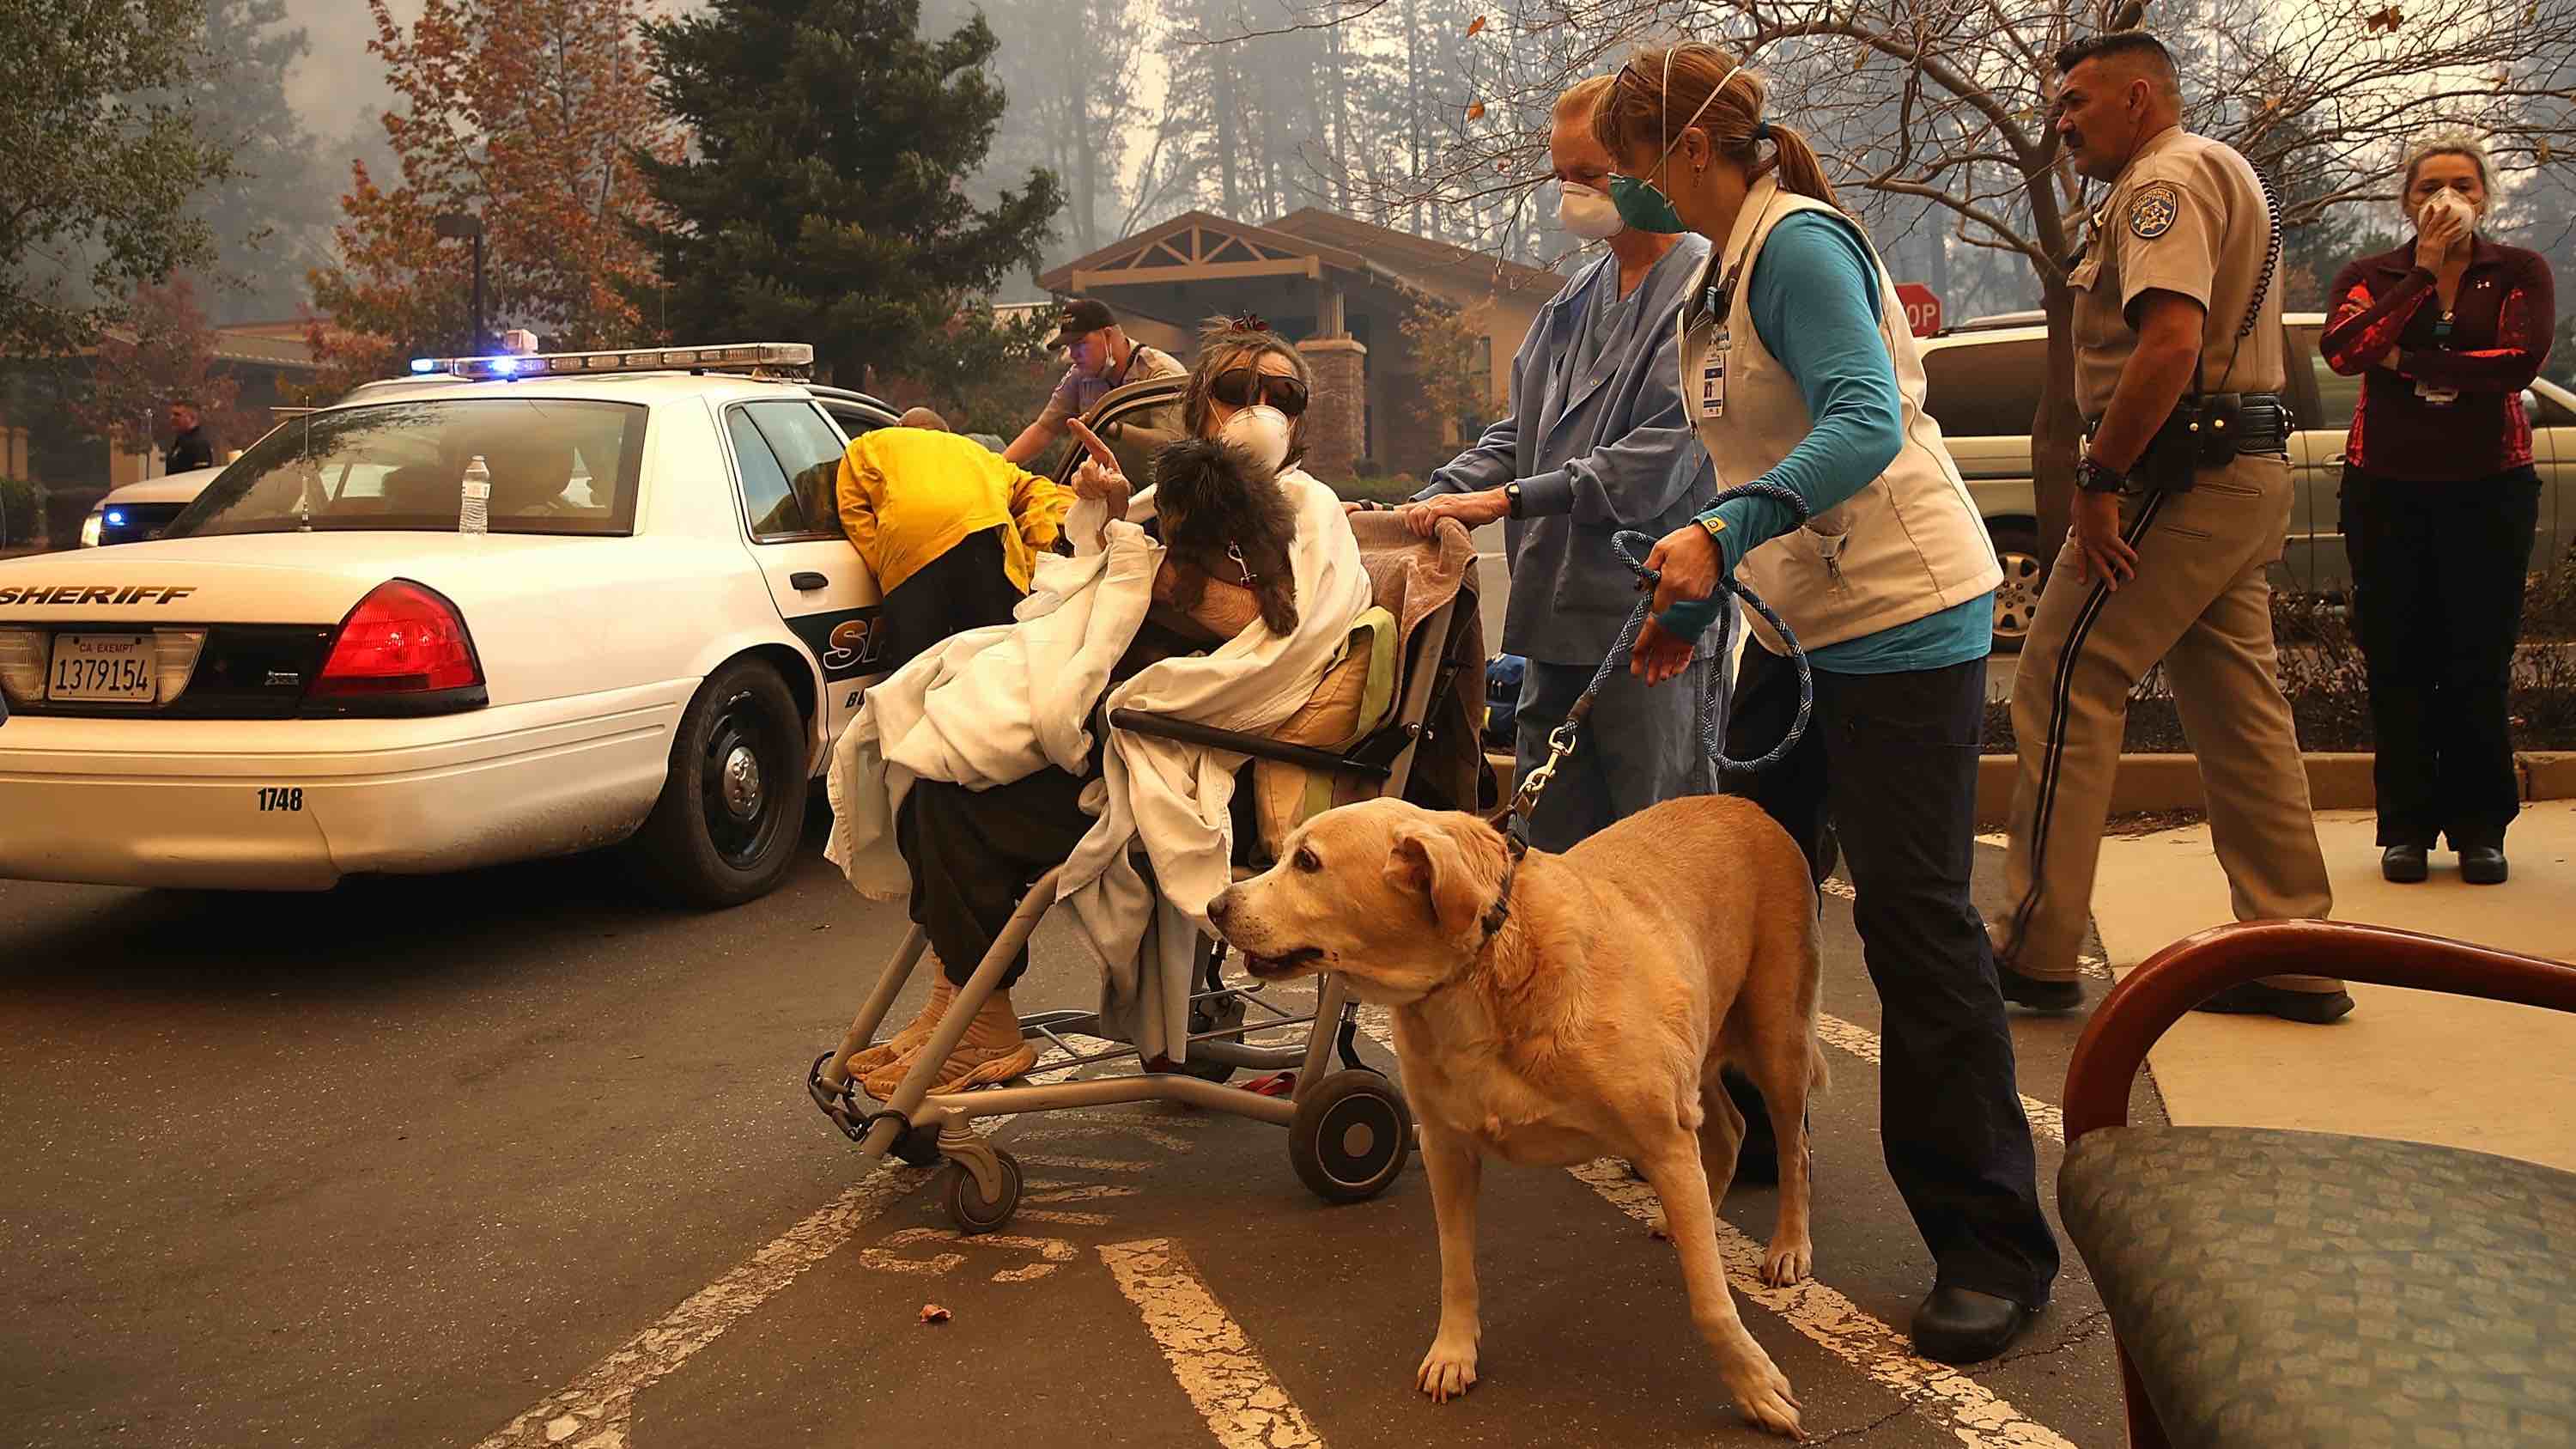 Hospital workers and first responders evacuate patients from the Feather River Hospital as the Camp Fire moved through the area on November 8, 2018 in Paradise, California.